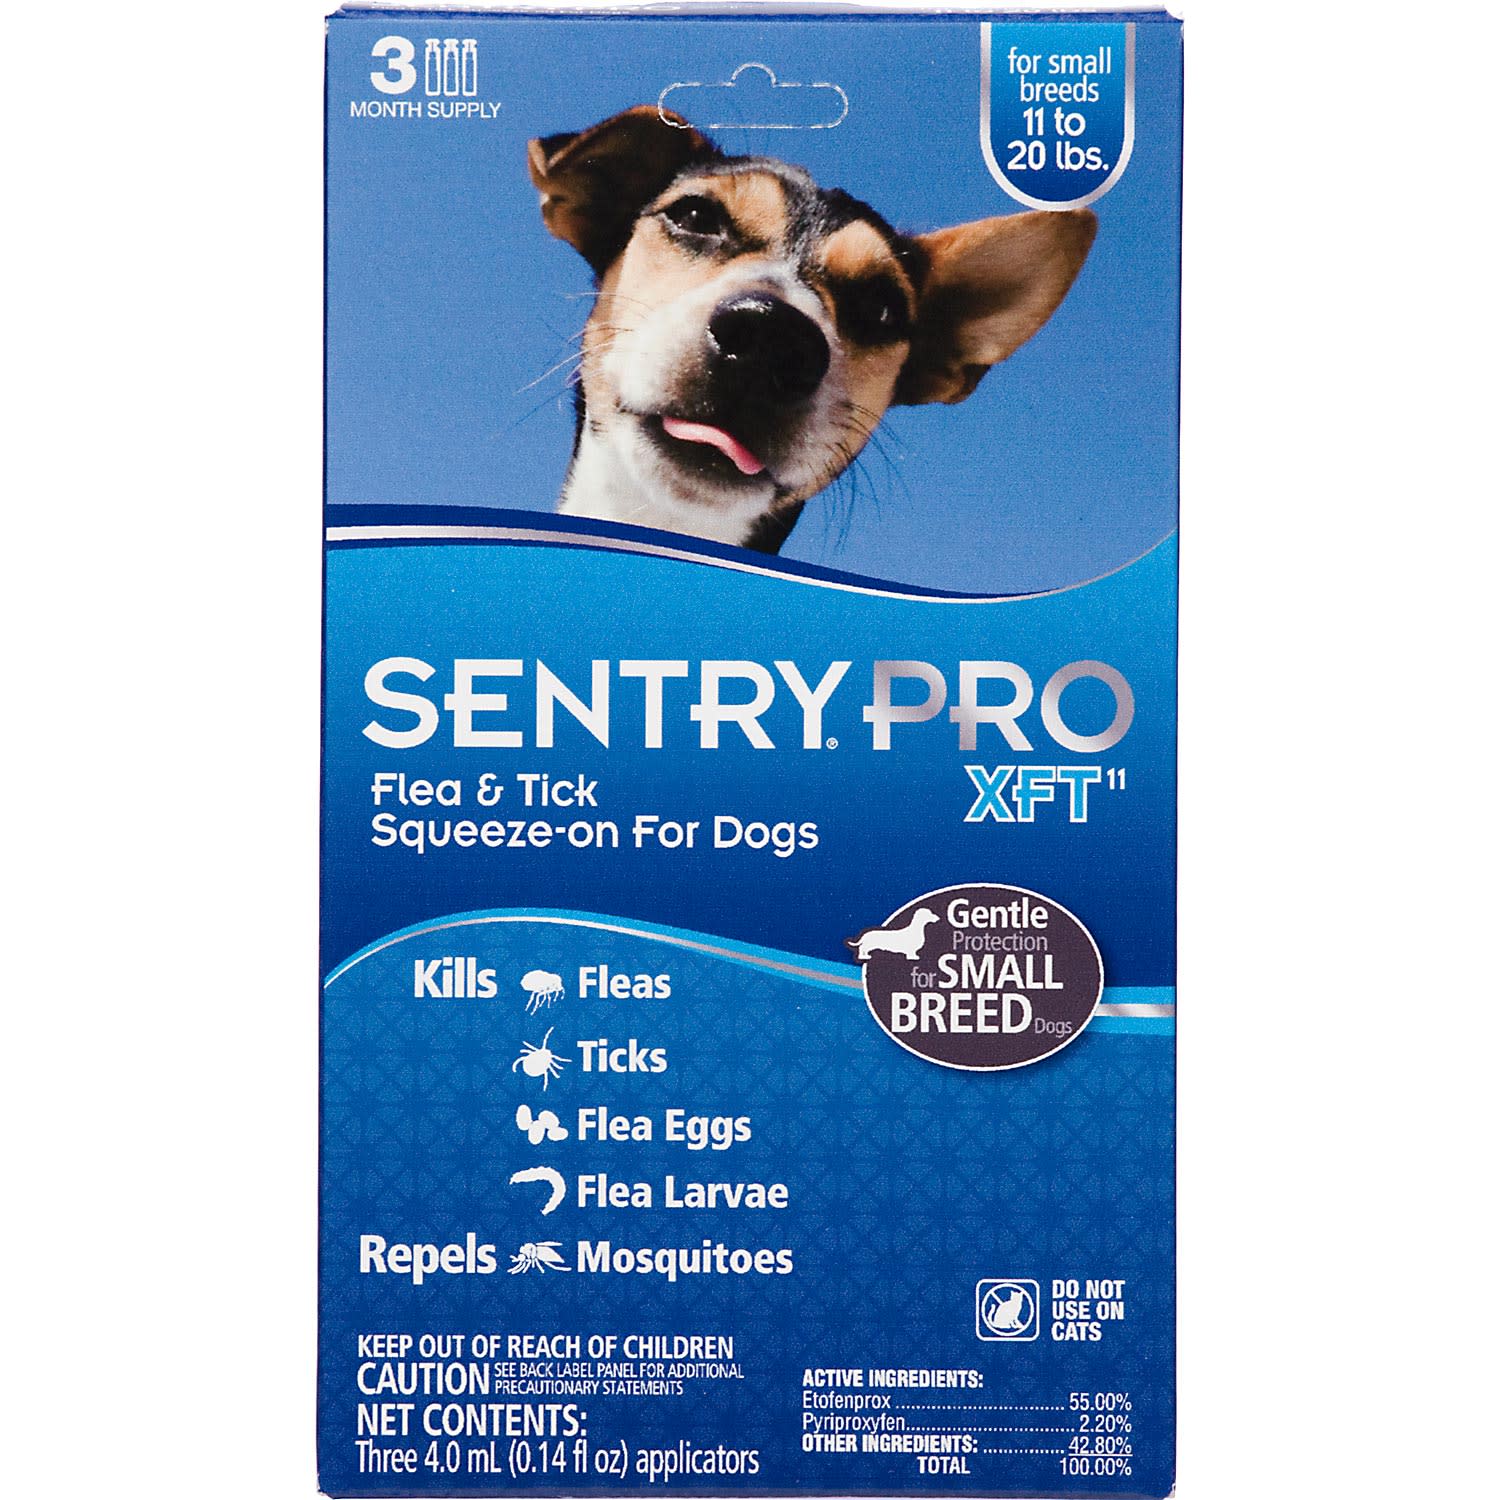 Sentry Pro XFT SqueezeOn Dogs 11 to 20 lbs. Flea & Tick Treatment, 3